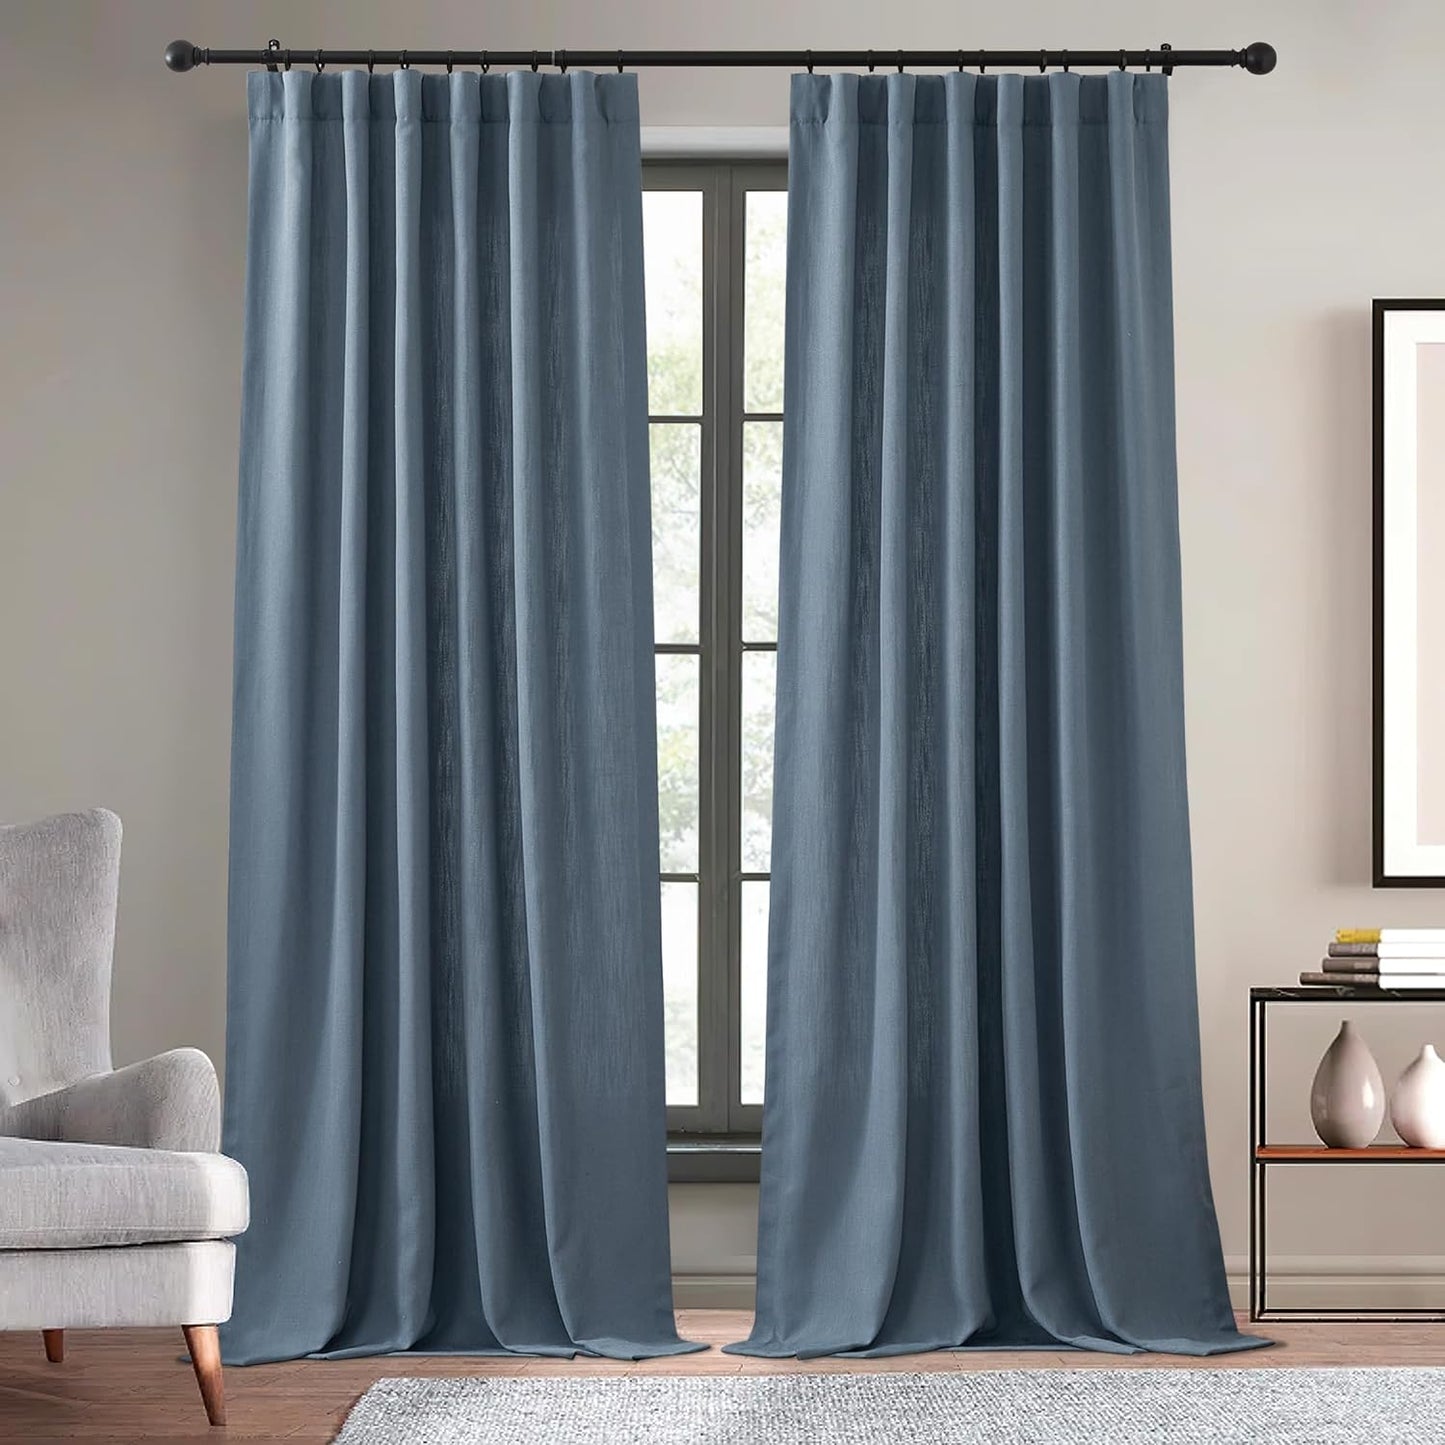 KGORGE Thick Faux Linen Weave Textured Curtains for Bedroom Light Filtering Semi Sheer Curtains Farmhouse Decor Pinch Pleated Window Drapes for Living Room, Linen, W 52" X L 96", 2 Pcs  KGORGE Denim W 52 X L 120 | Pair 